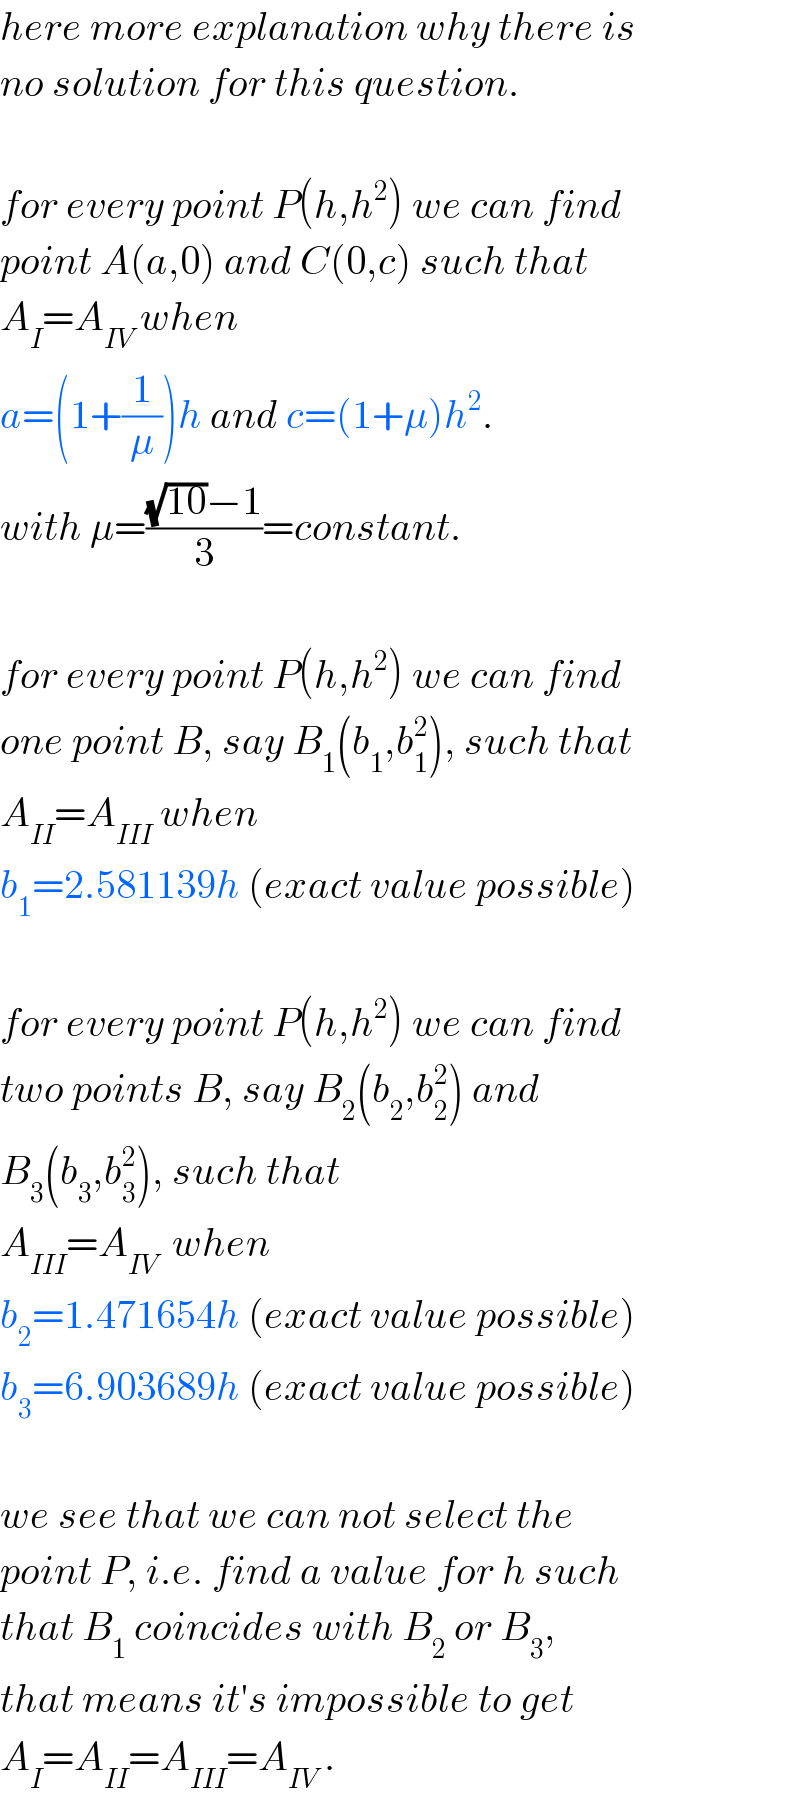 here more explanation why there is  no solution for this question.    for every point P(h,h^2 ) we can find  point A(a,0) and C(0,c) such that  A_I =A_(IV)  when  a=(1+(1/μ))h and c=(1+μ)h^2 .  with μ=(((√(10))−1)/3)=constant.    for every point P(h,h^2 ) we can find  one point B, say B_1 (b_1 ,b_1 ^2 ), such that  A_(II) =A_(III)  when  b_1 =2.581139h (exact value possible)    for every point P(h,h^2 ) we can find  two points B, say B_2 (b_2 ,b_2 ^2 ) and  B_3 (b_3 ,b_3 ^2 ), such that  A_(III) =A_(IV)   when  b_2 =1.471654h (exact value possible)  b_3 =6.903689h (exact value possible)    we see that we can not select the  point P, i.e. find a value for h such  that B_1  coincides with B_2  or B_3 ,  that means it′s impossible to get  A_I =A_(II) =A_(III) =A_(IV)  .  